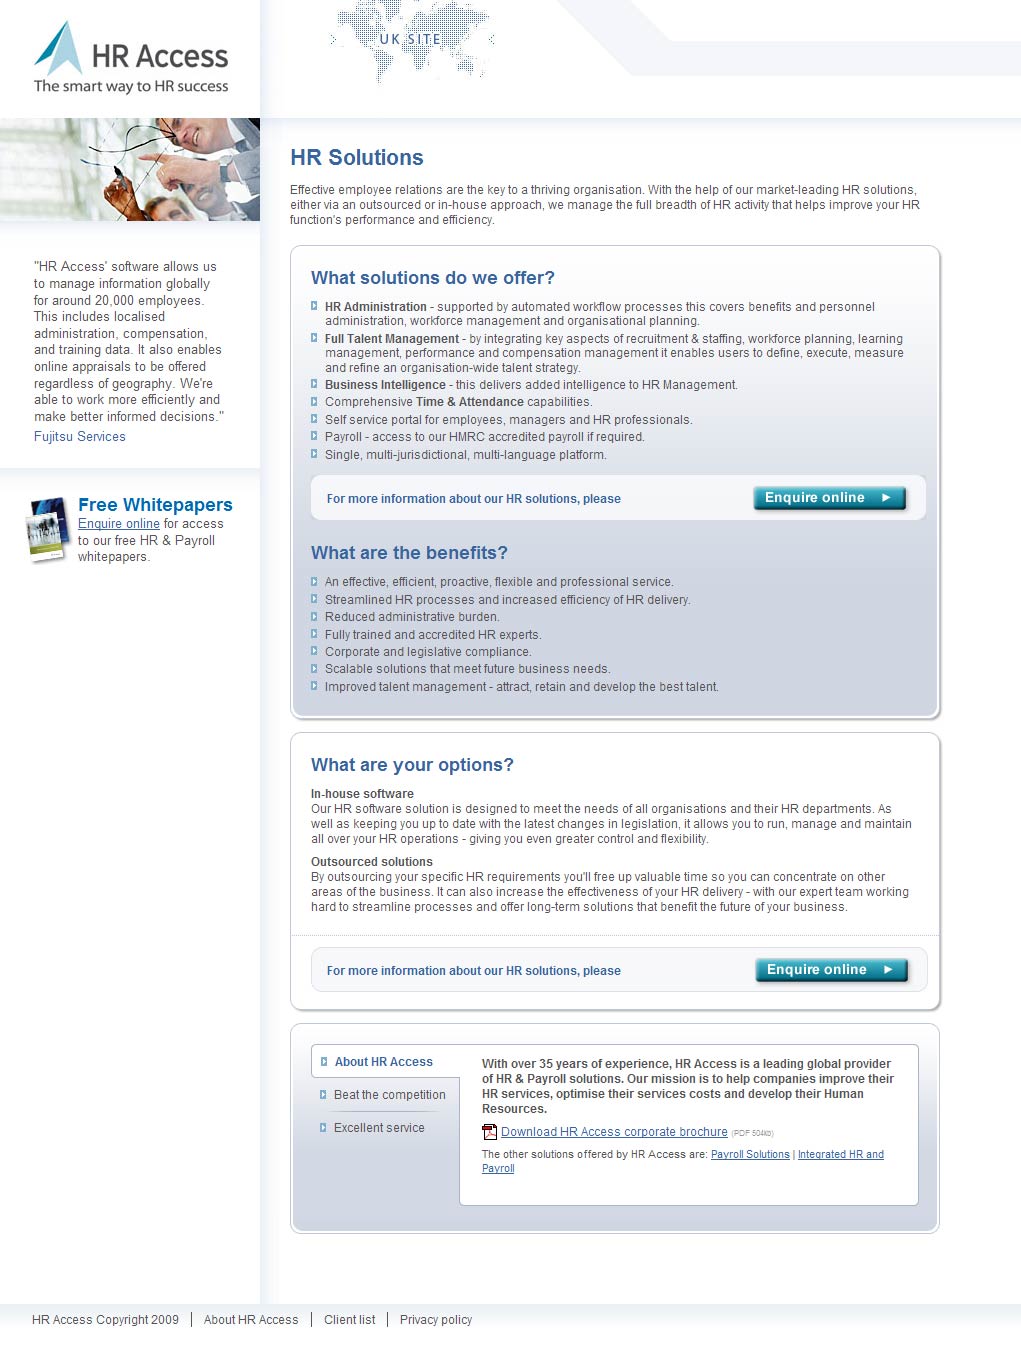 HR Access homepage image.